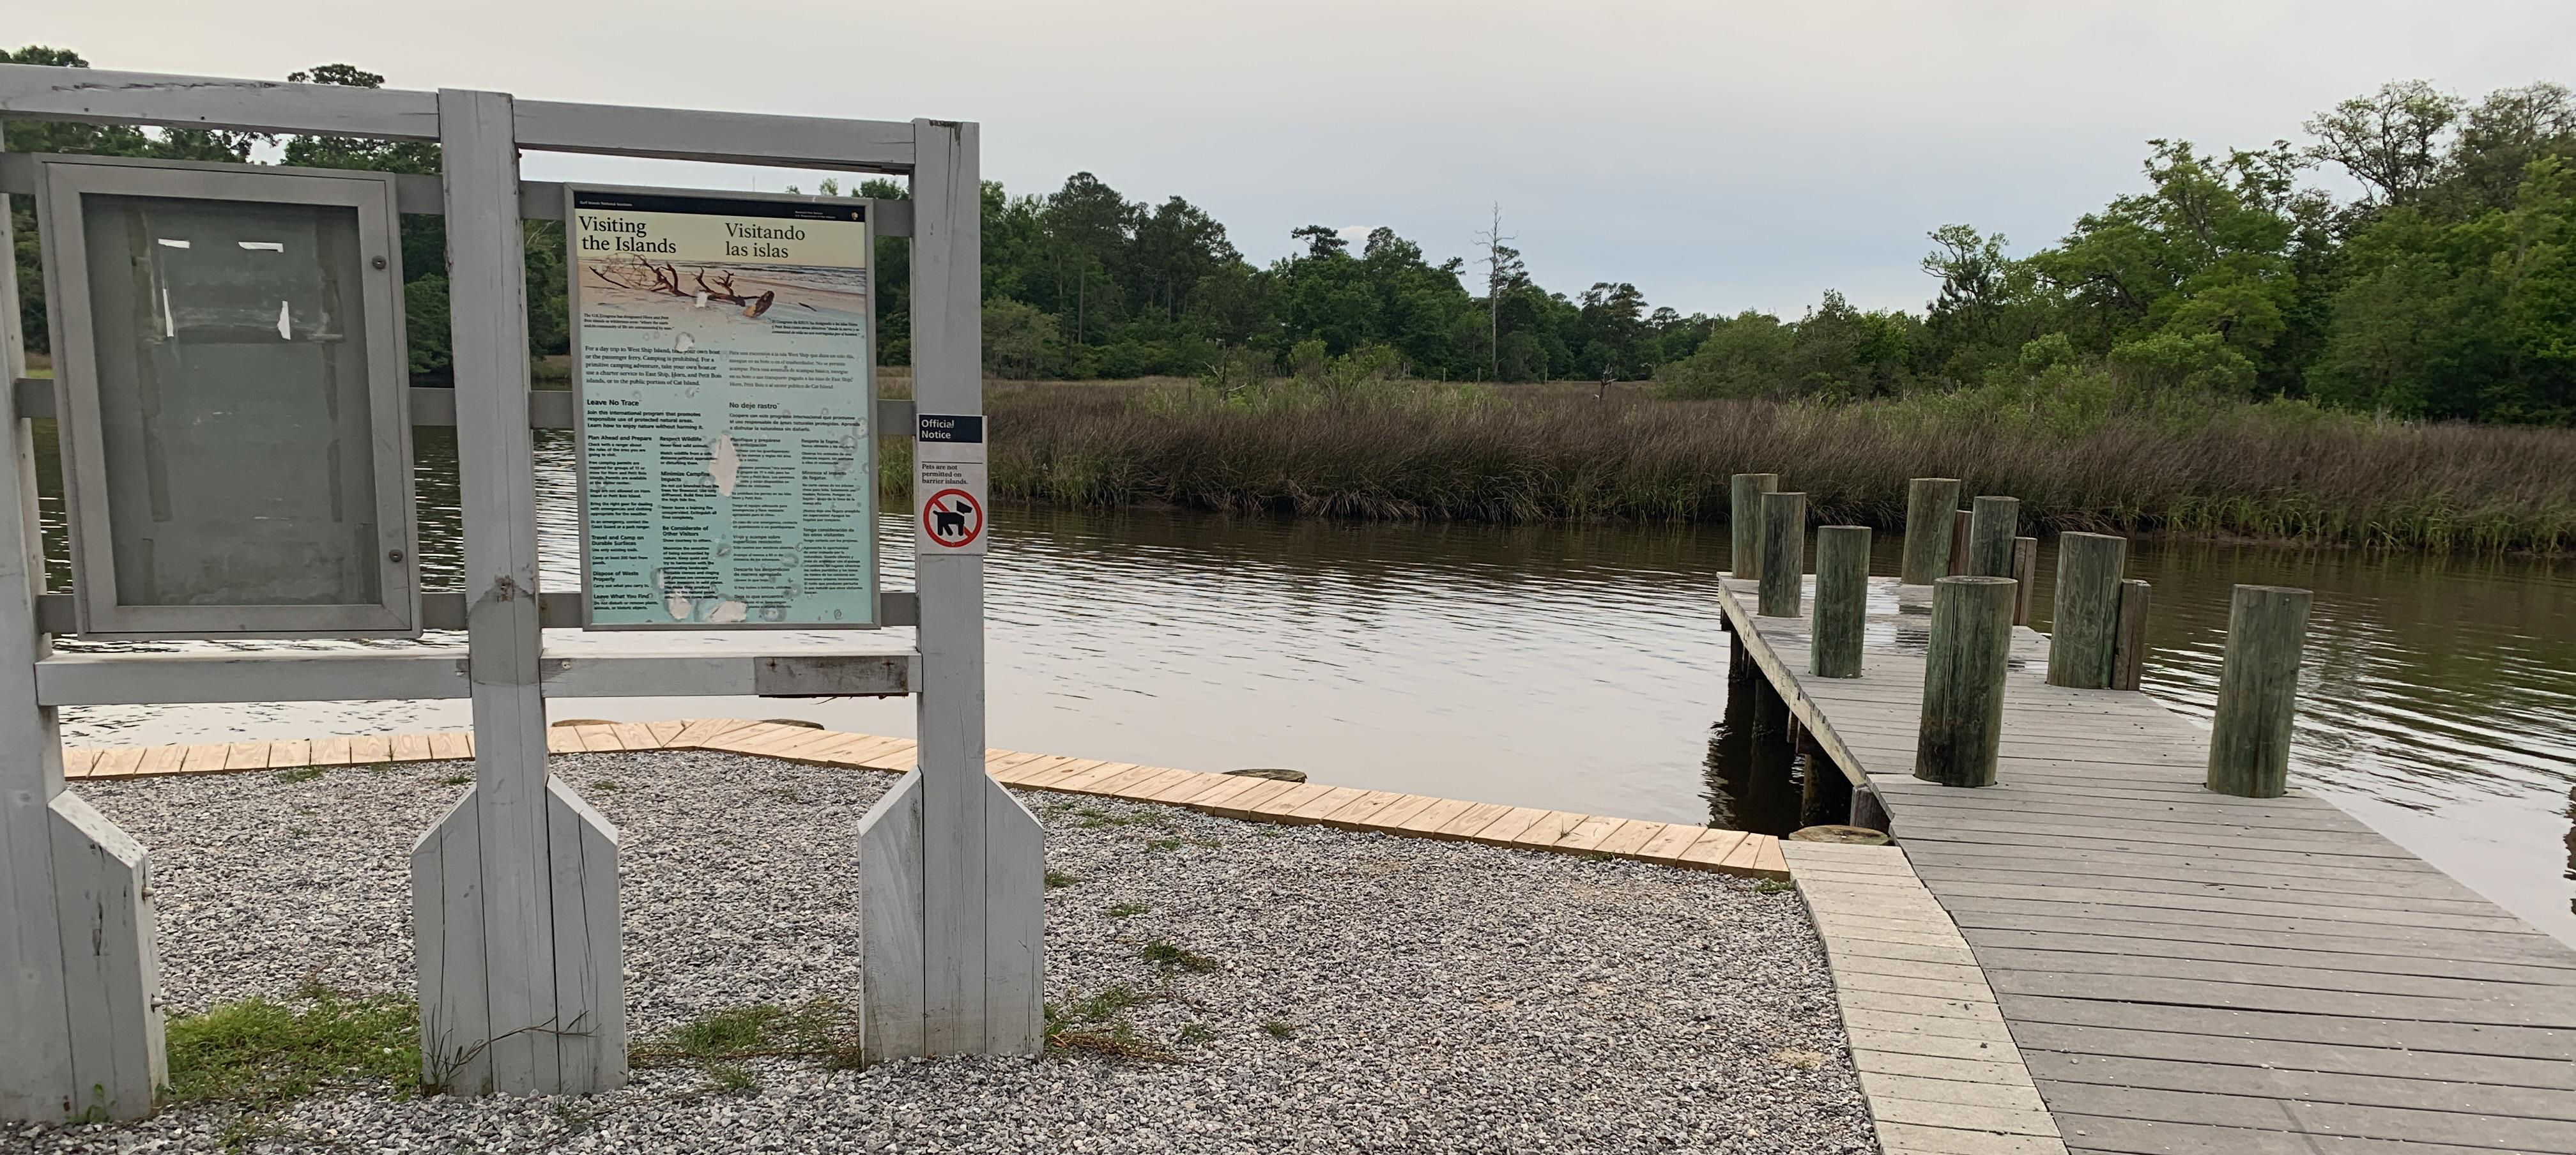 A wooden sign stands in front of a finger pier extending over water in front of salt marsh.